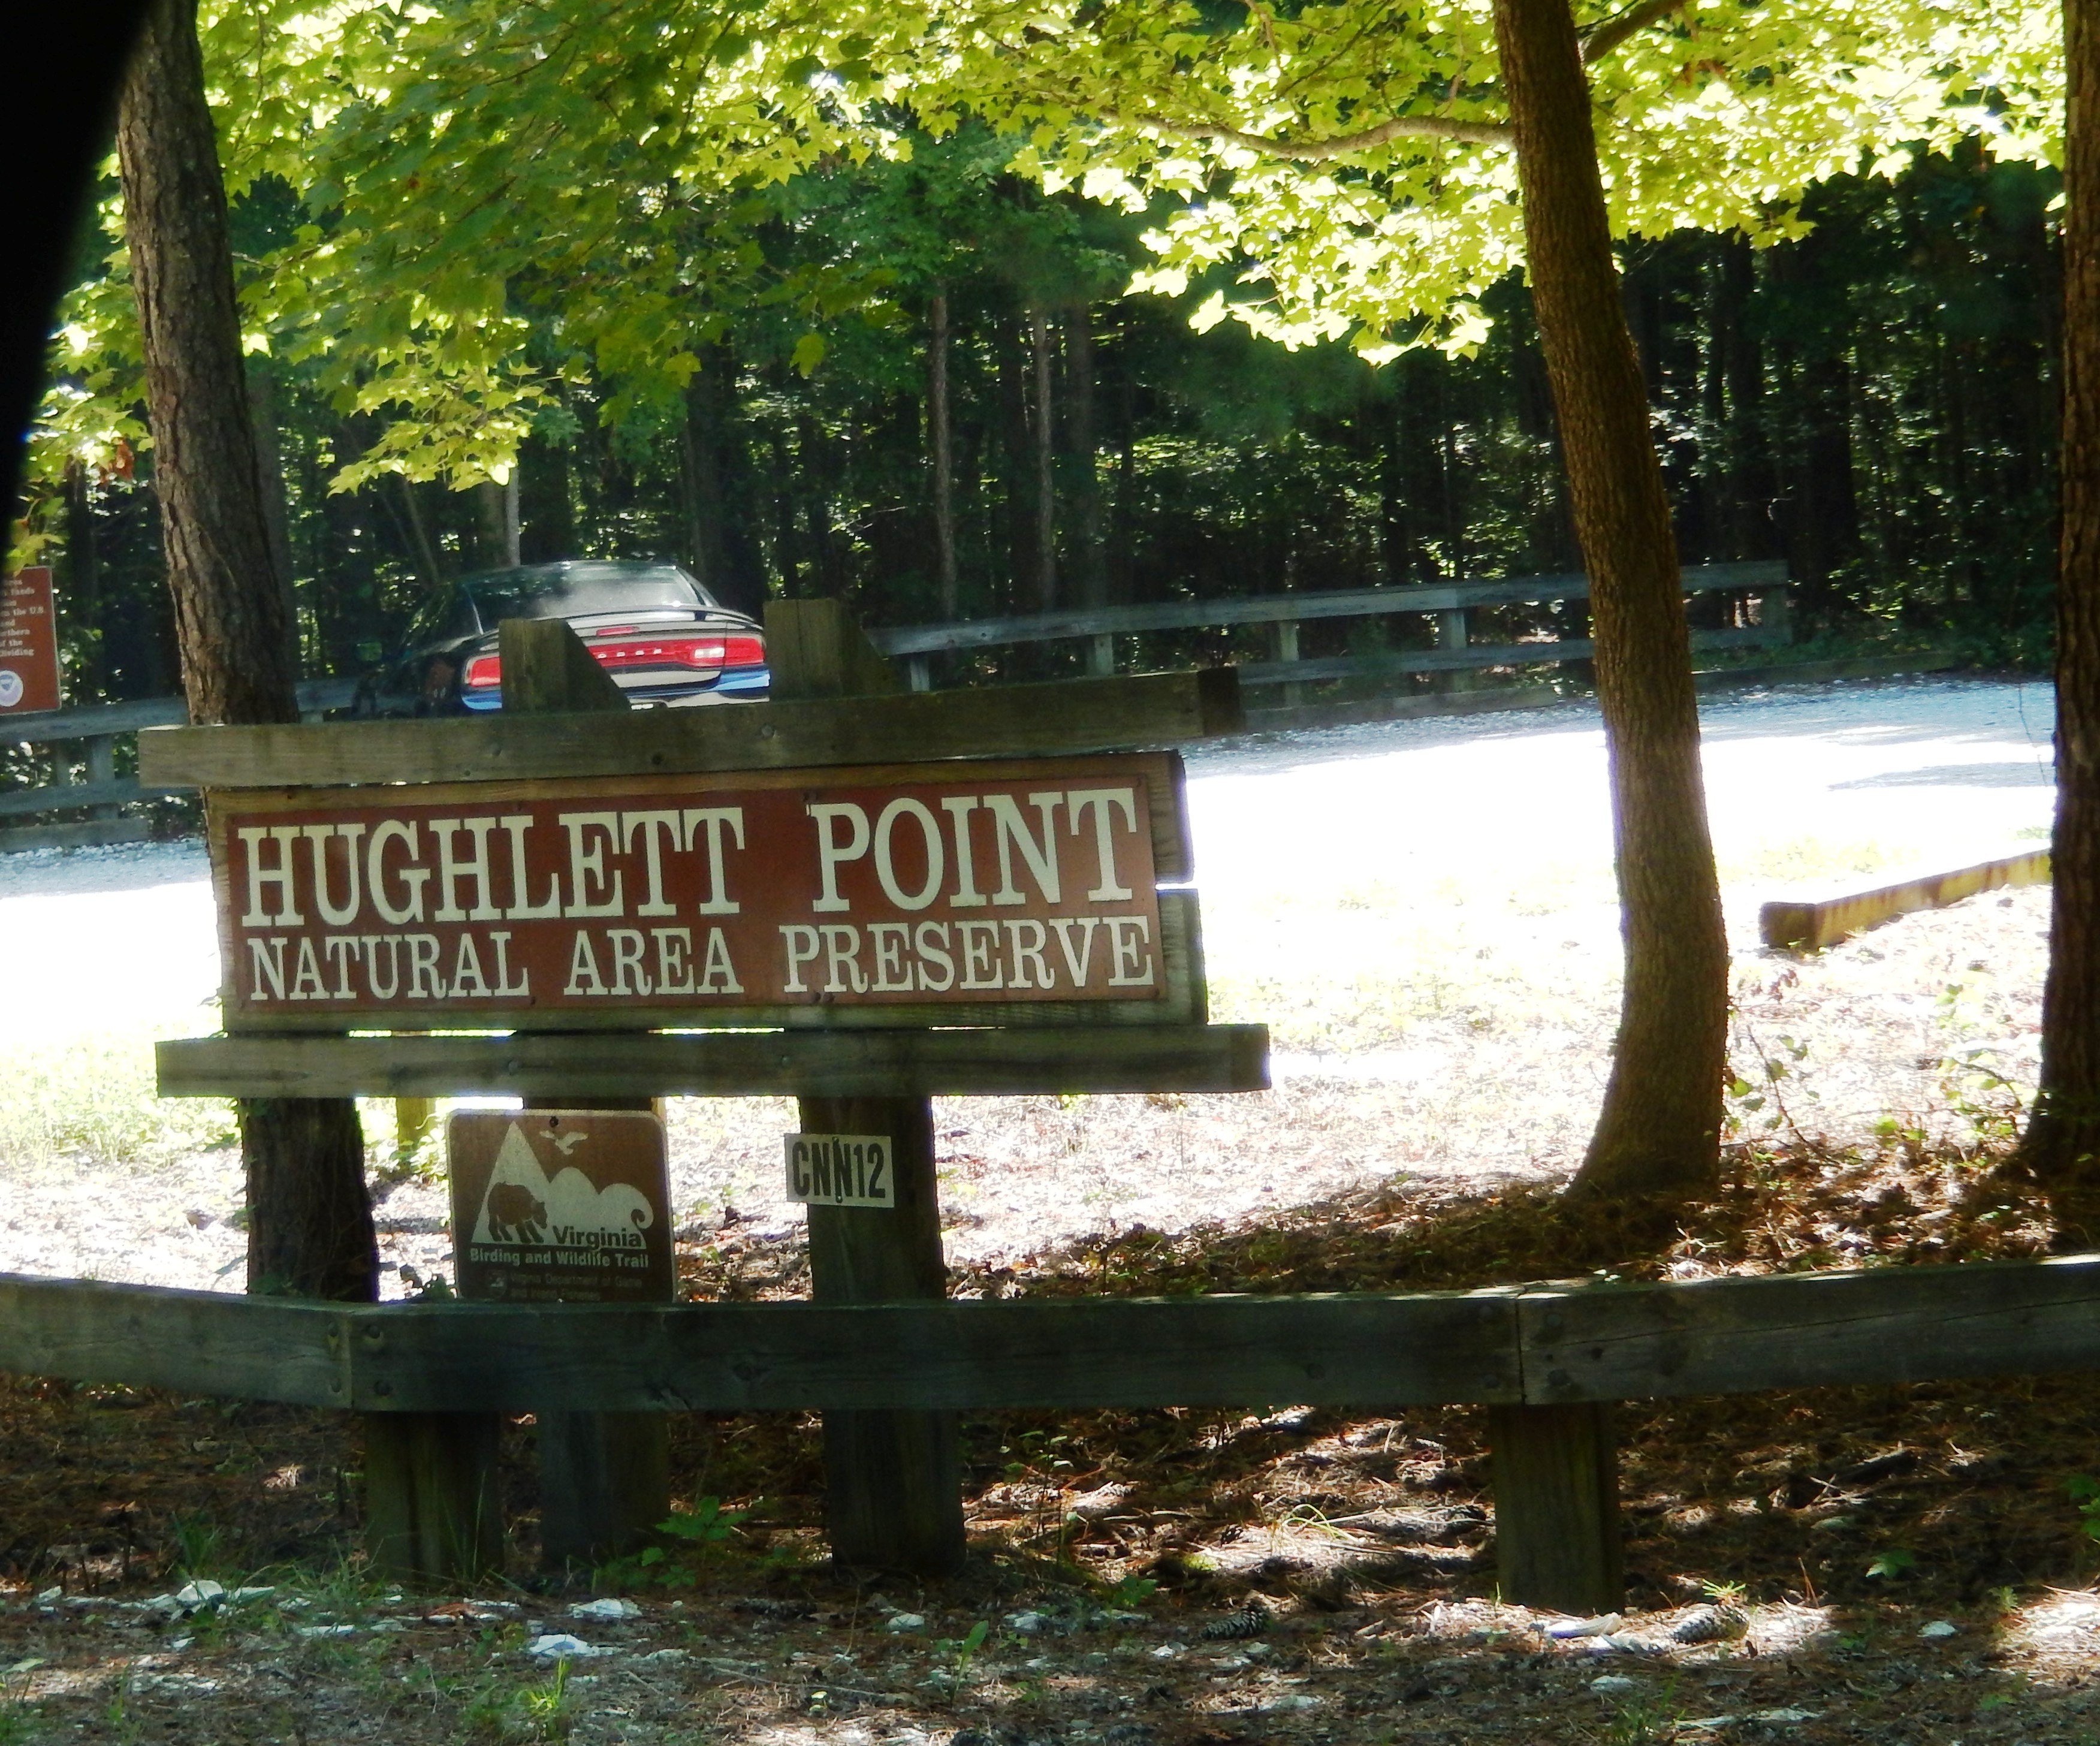 Hughlett Point Natural Area Preserve sign at entrance to the cutout